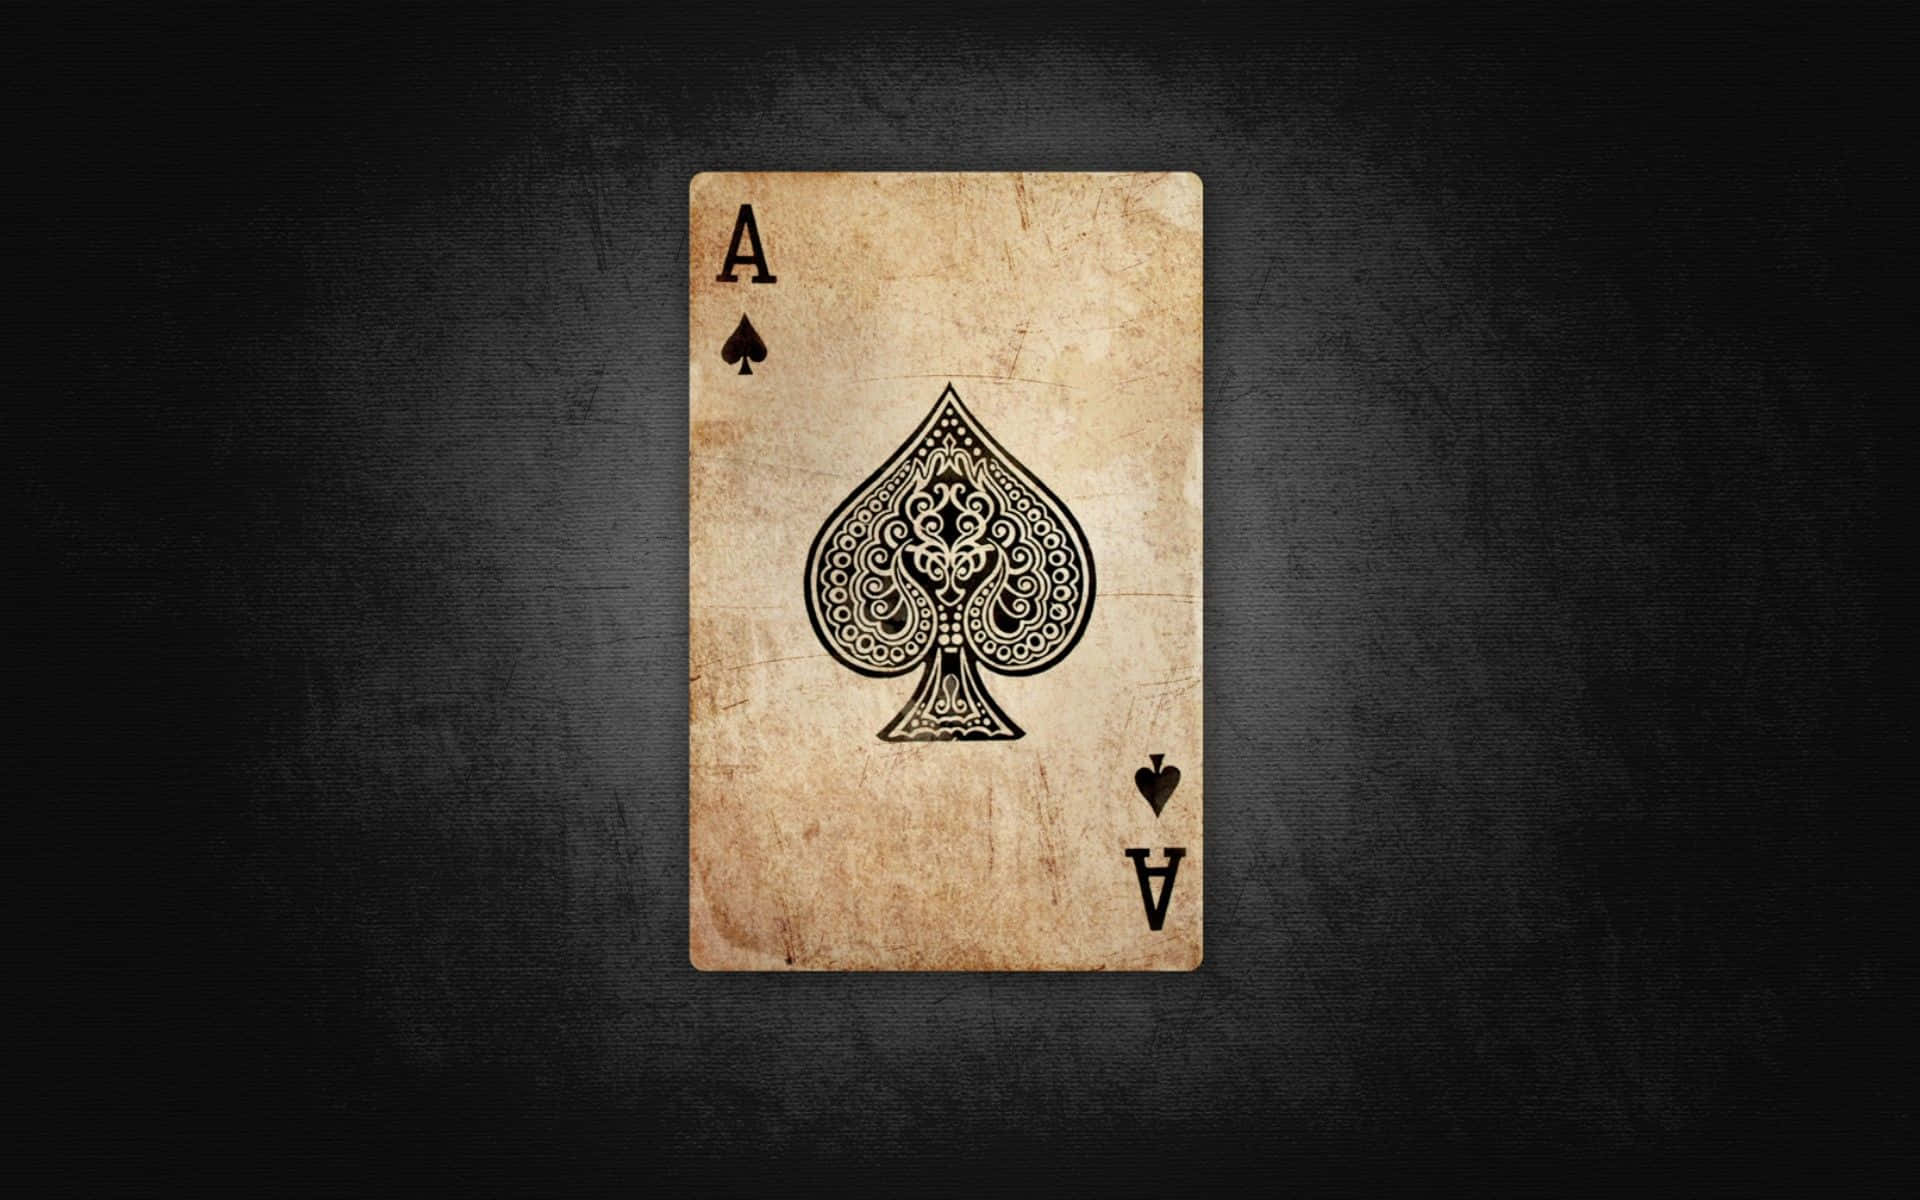 A hand of cards on a sleek, black background Wallpaper